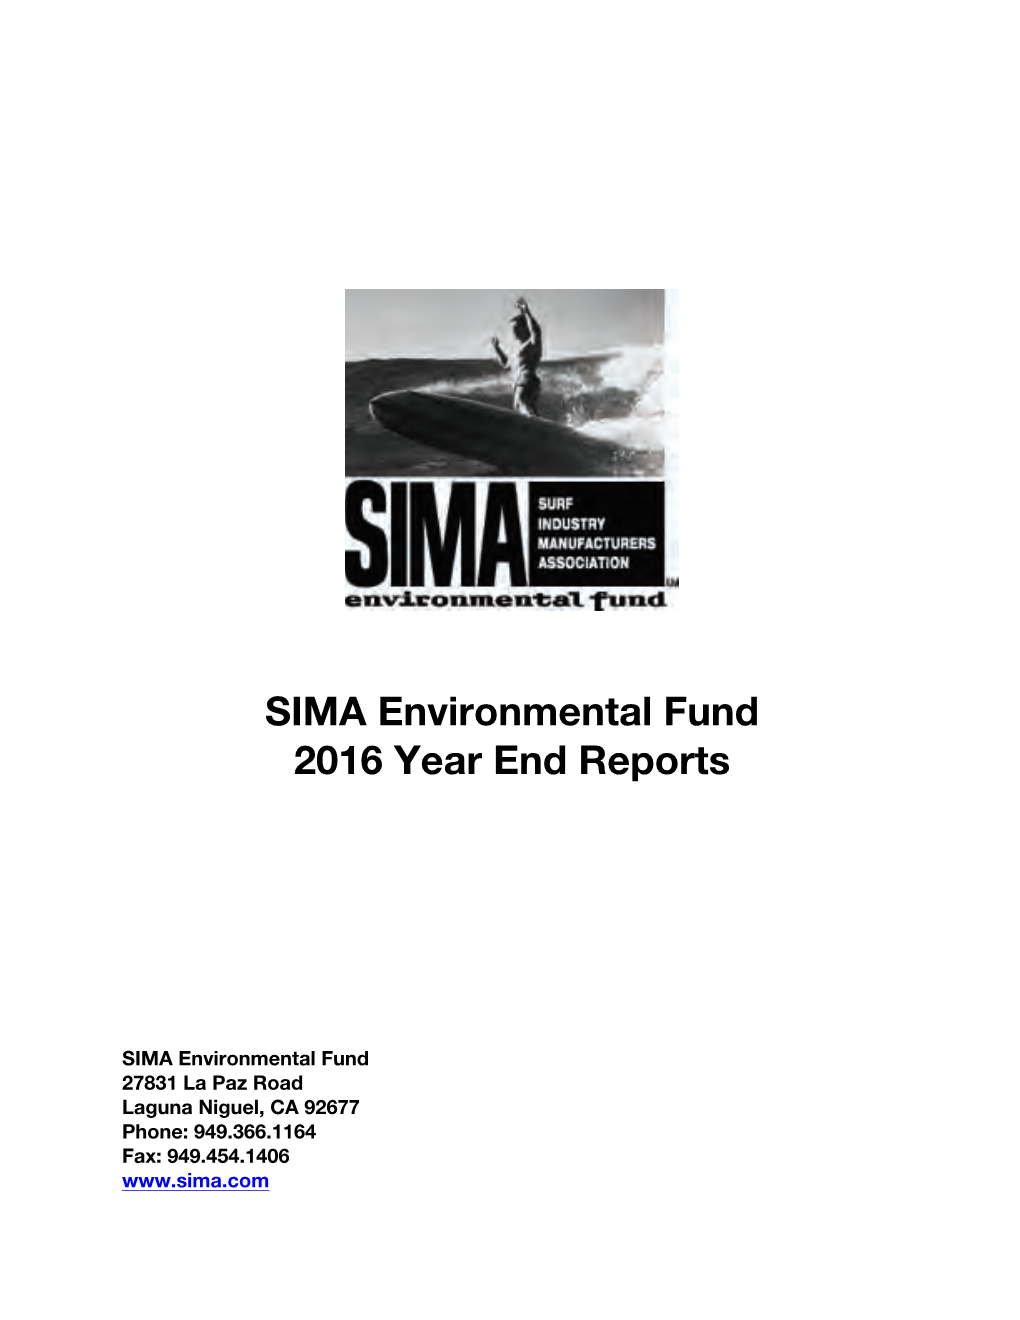 SIMA Environmental Fund 2016 Year End Reports